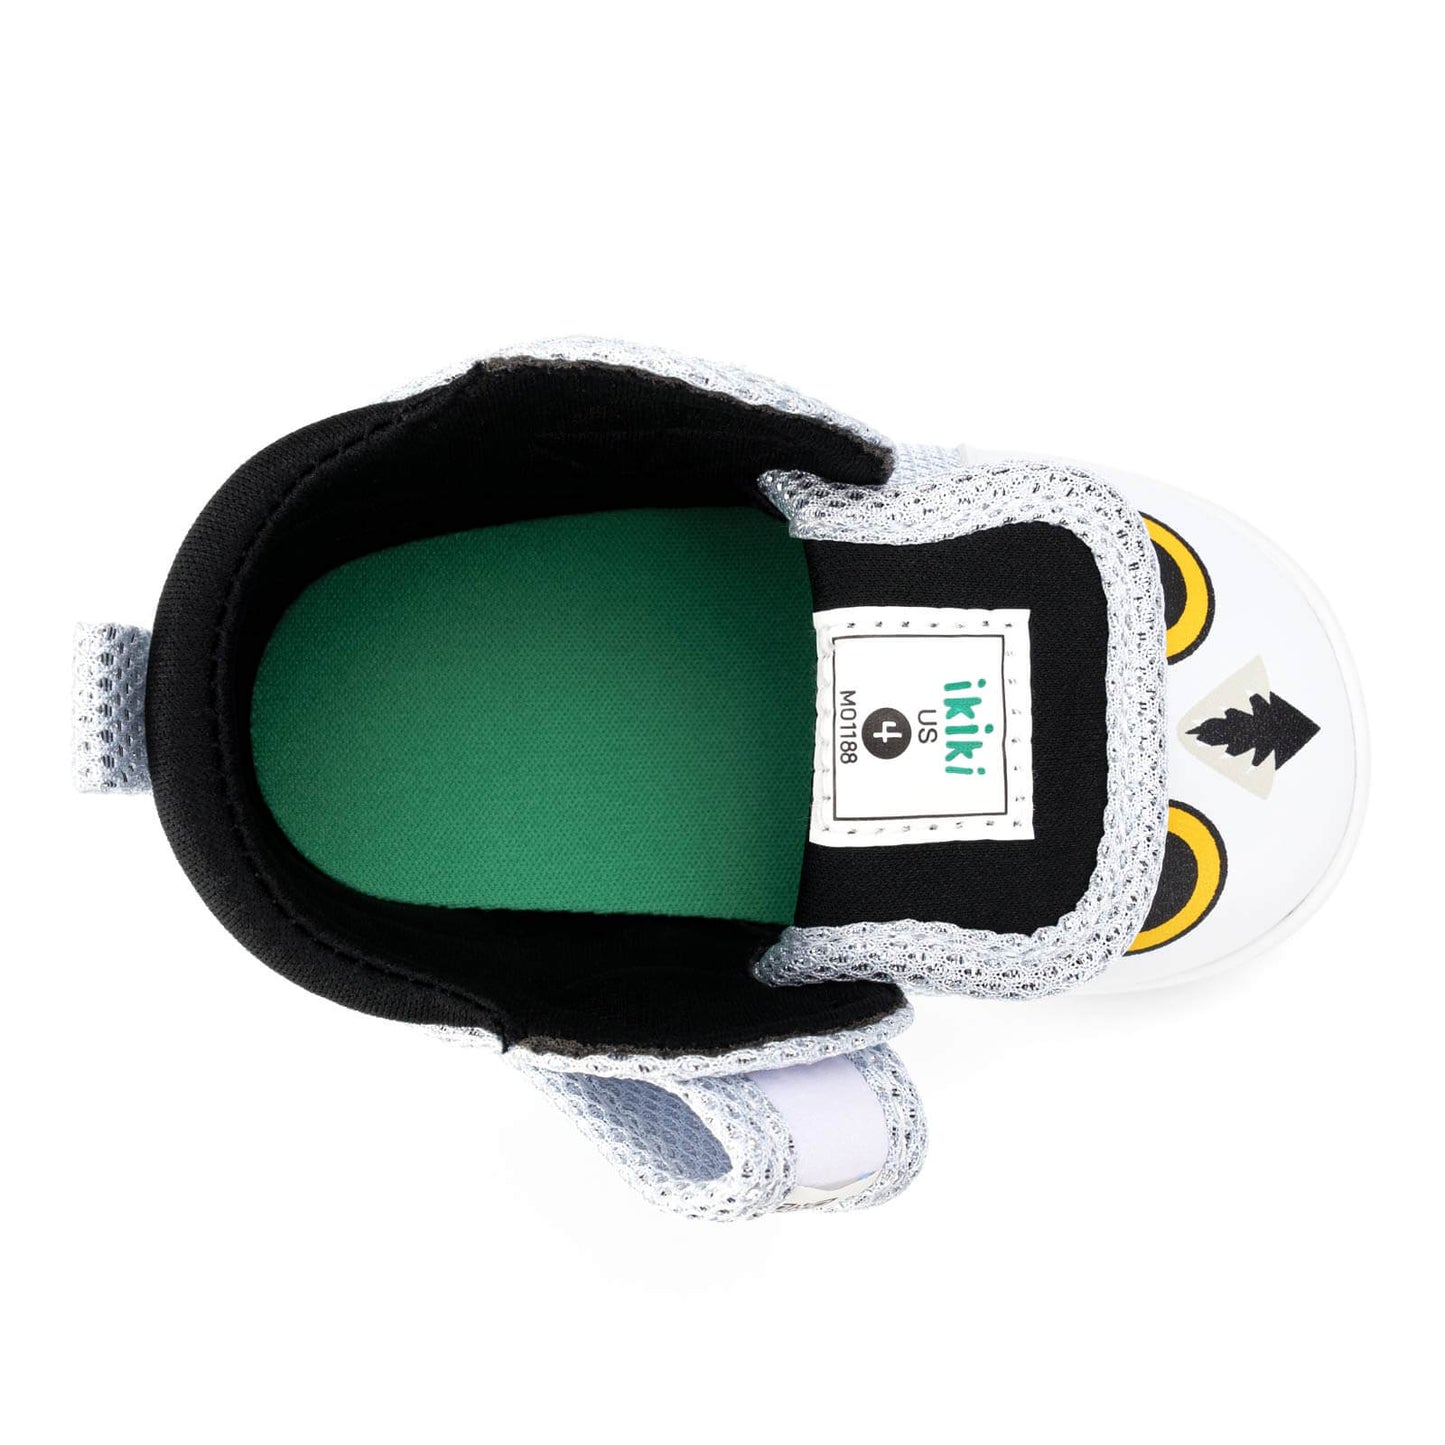 
                  
                    Snowy Owl Squeaky Toddler Shoes | Sparkly White
                  
                